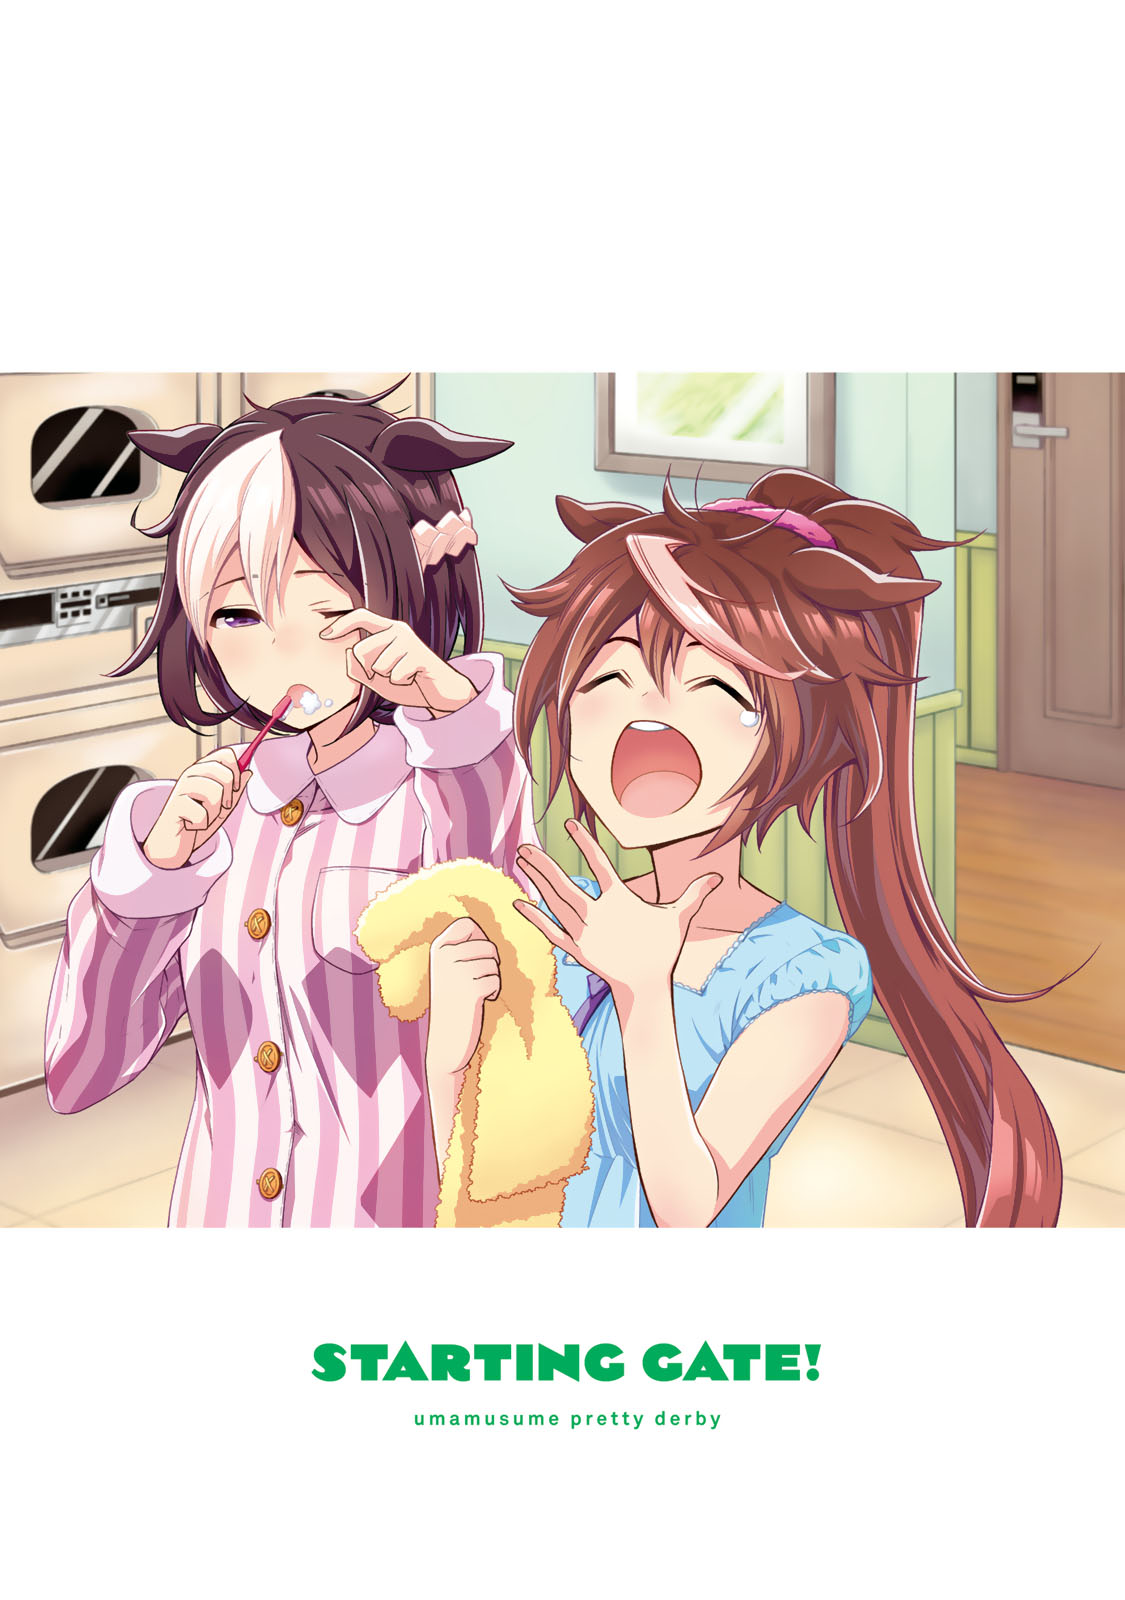 Starting Gate! Uma Musume Pretty Derby Vol.3 Chapter 15: An Extraordinary Day #1 - Picture 1